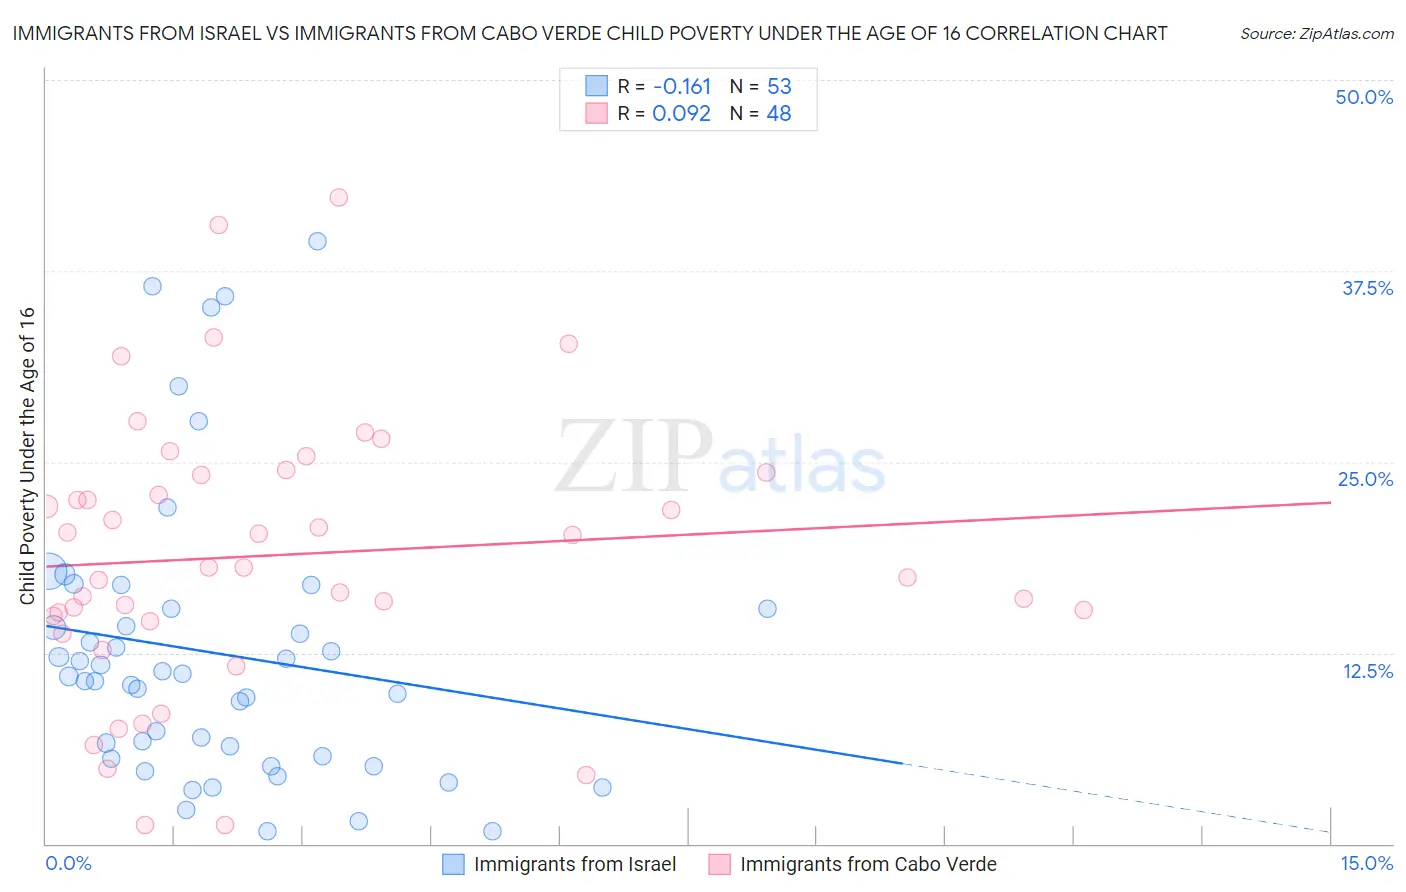 Immigrants from Israel vs Immigrants from Cabo Verde Child Poverty Under the Age of 16